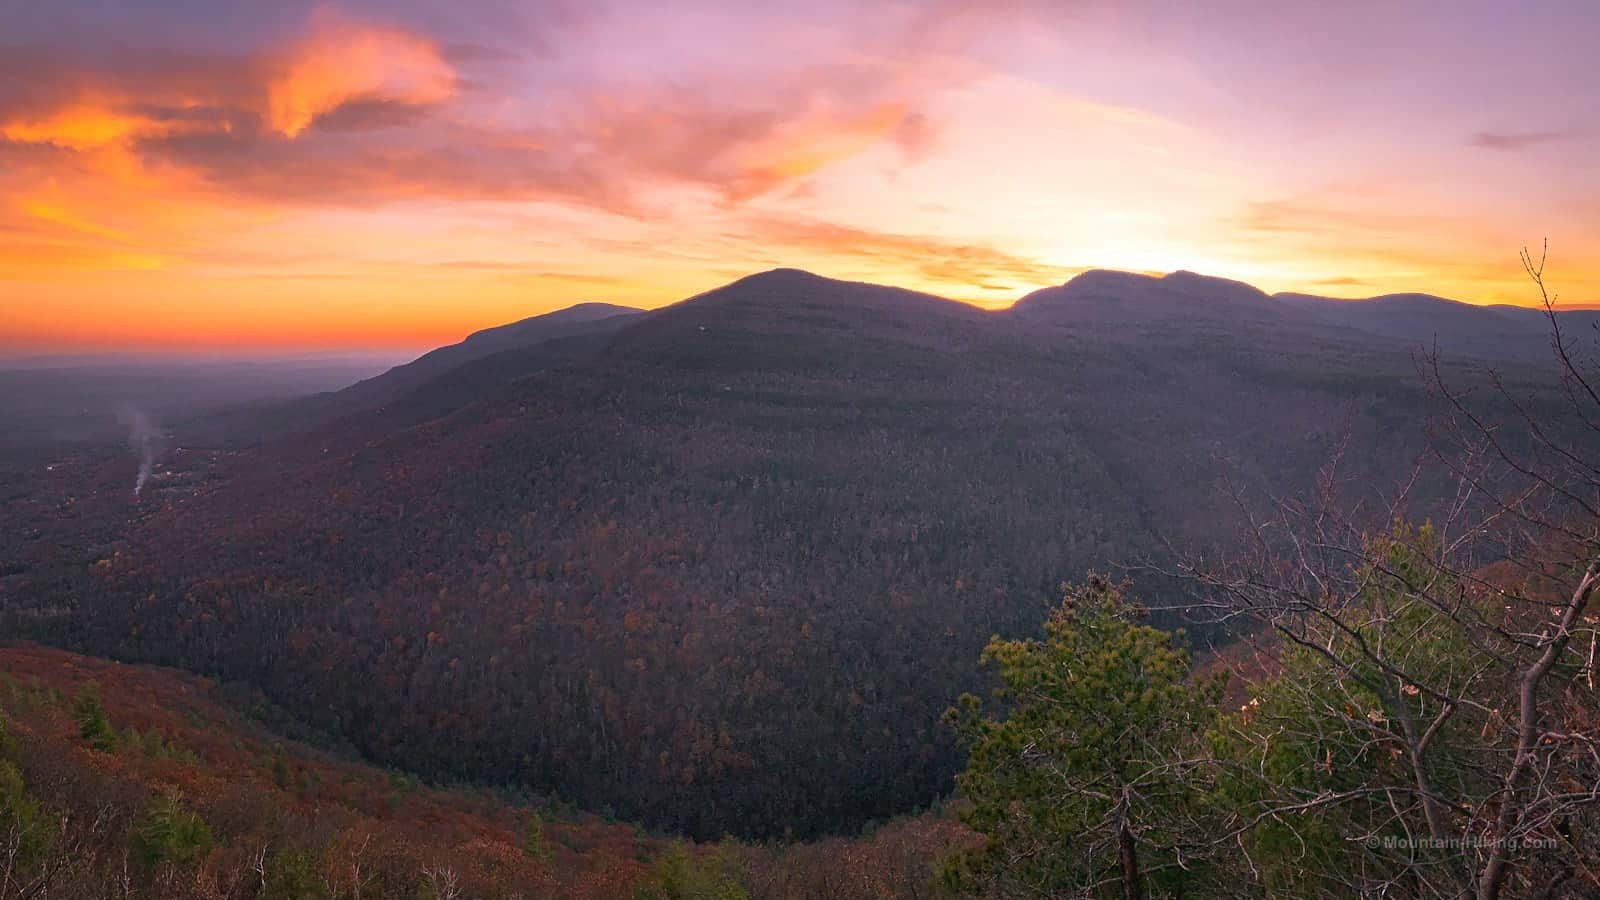 sunset over devil’s path mountain summits